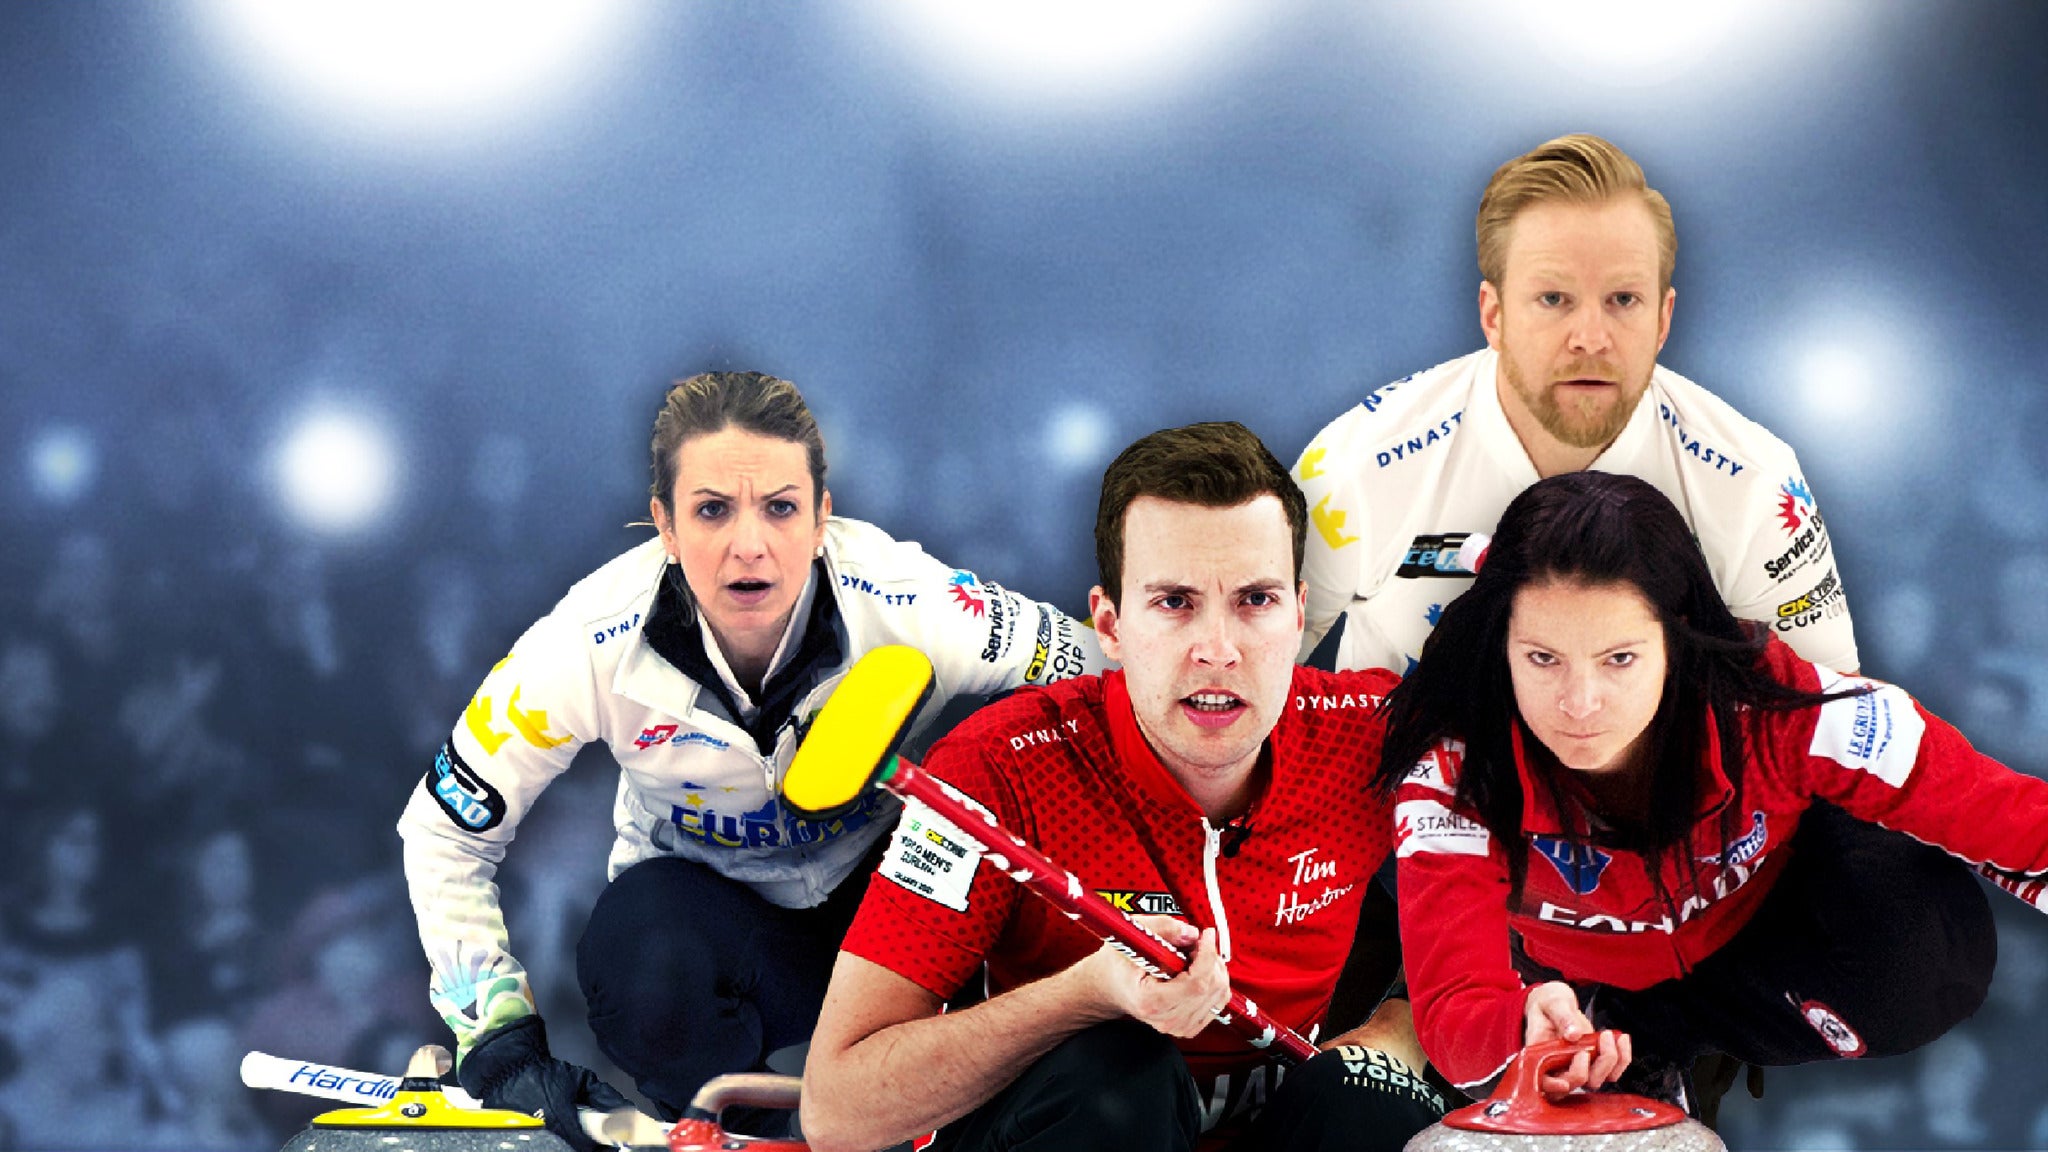 Continental Cup of Curling Tickets Single Game Tickets & Schedule